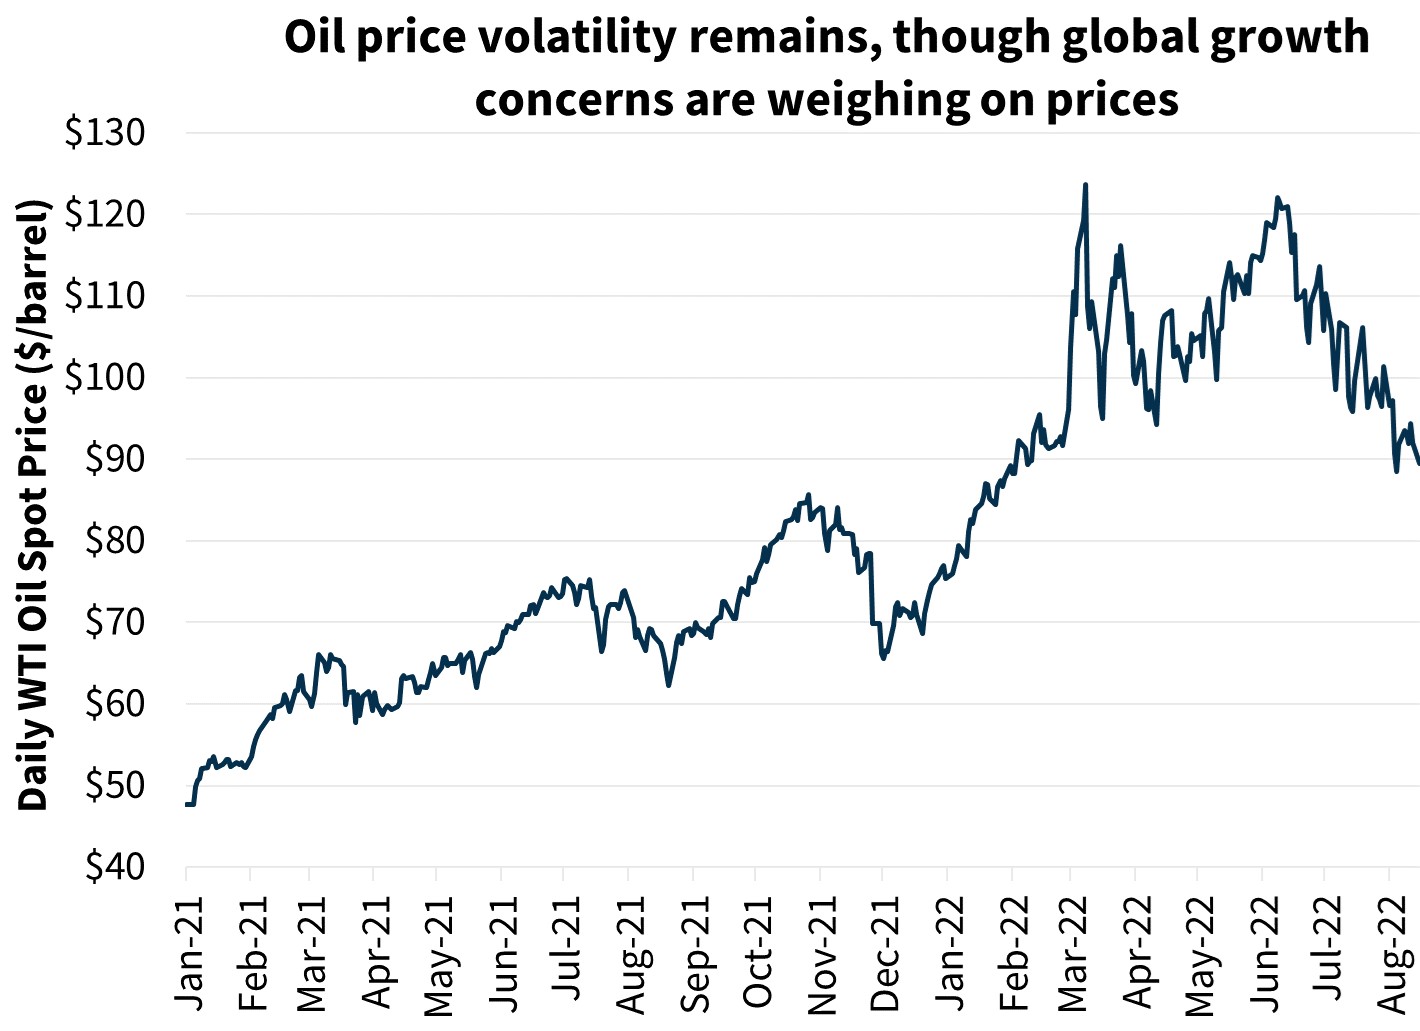  Oil price volatility remains, though global growth concerns are weighing on prices 